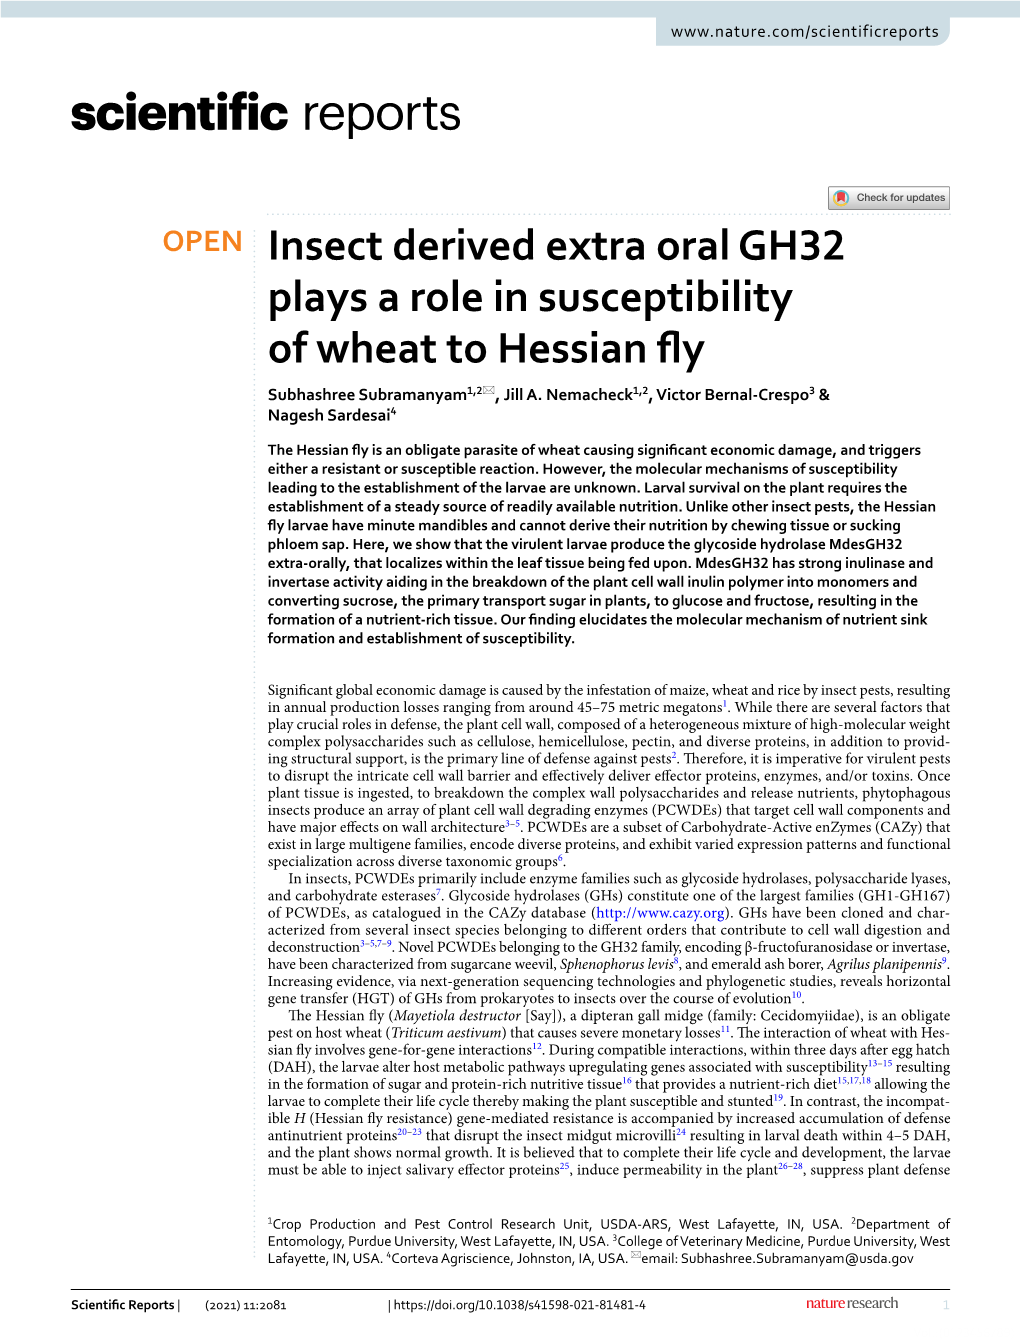 Insect Derived Extra Oral GH32 Plays a Role in Susceptibility of Wheat to Hessian Fy Subhashree Subramanyam1,2*, Jill A